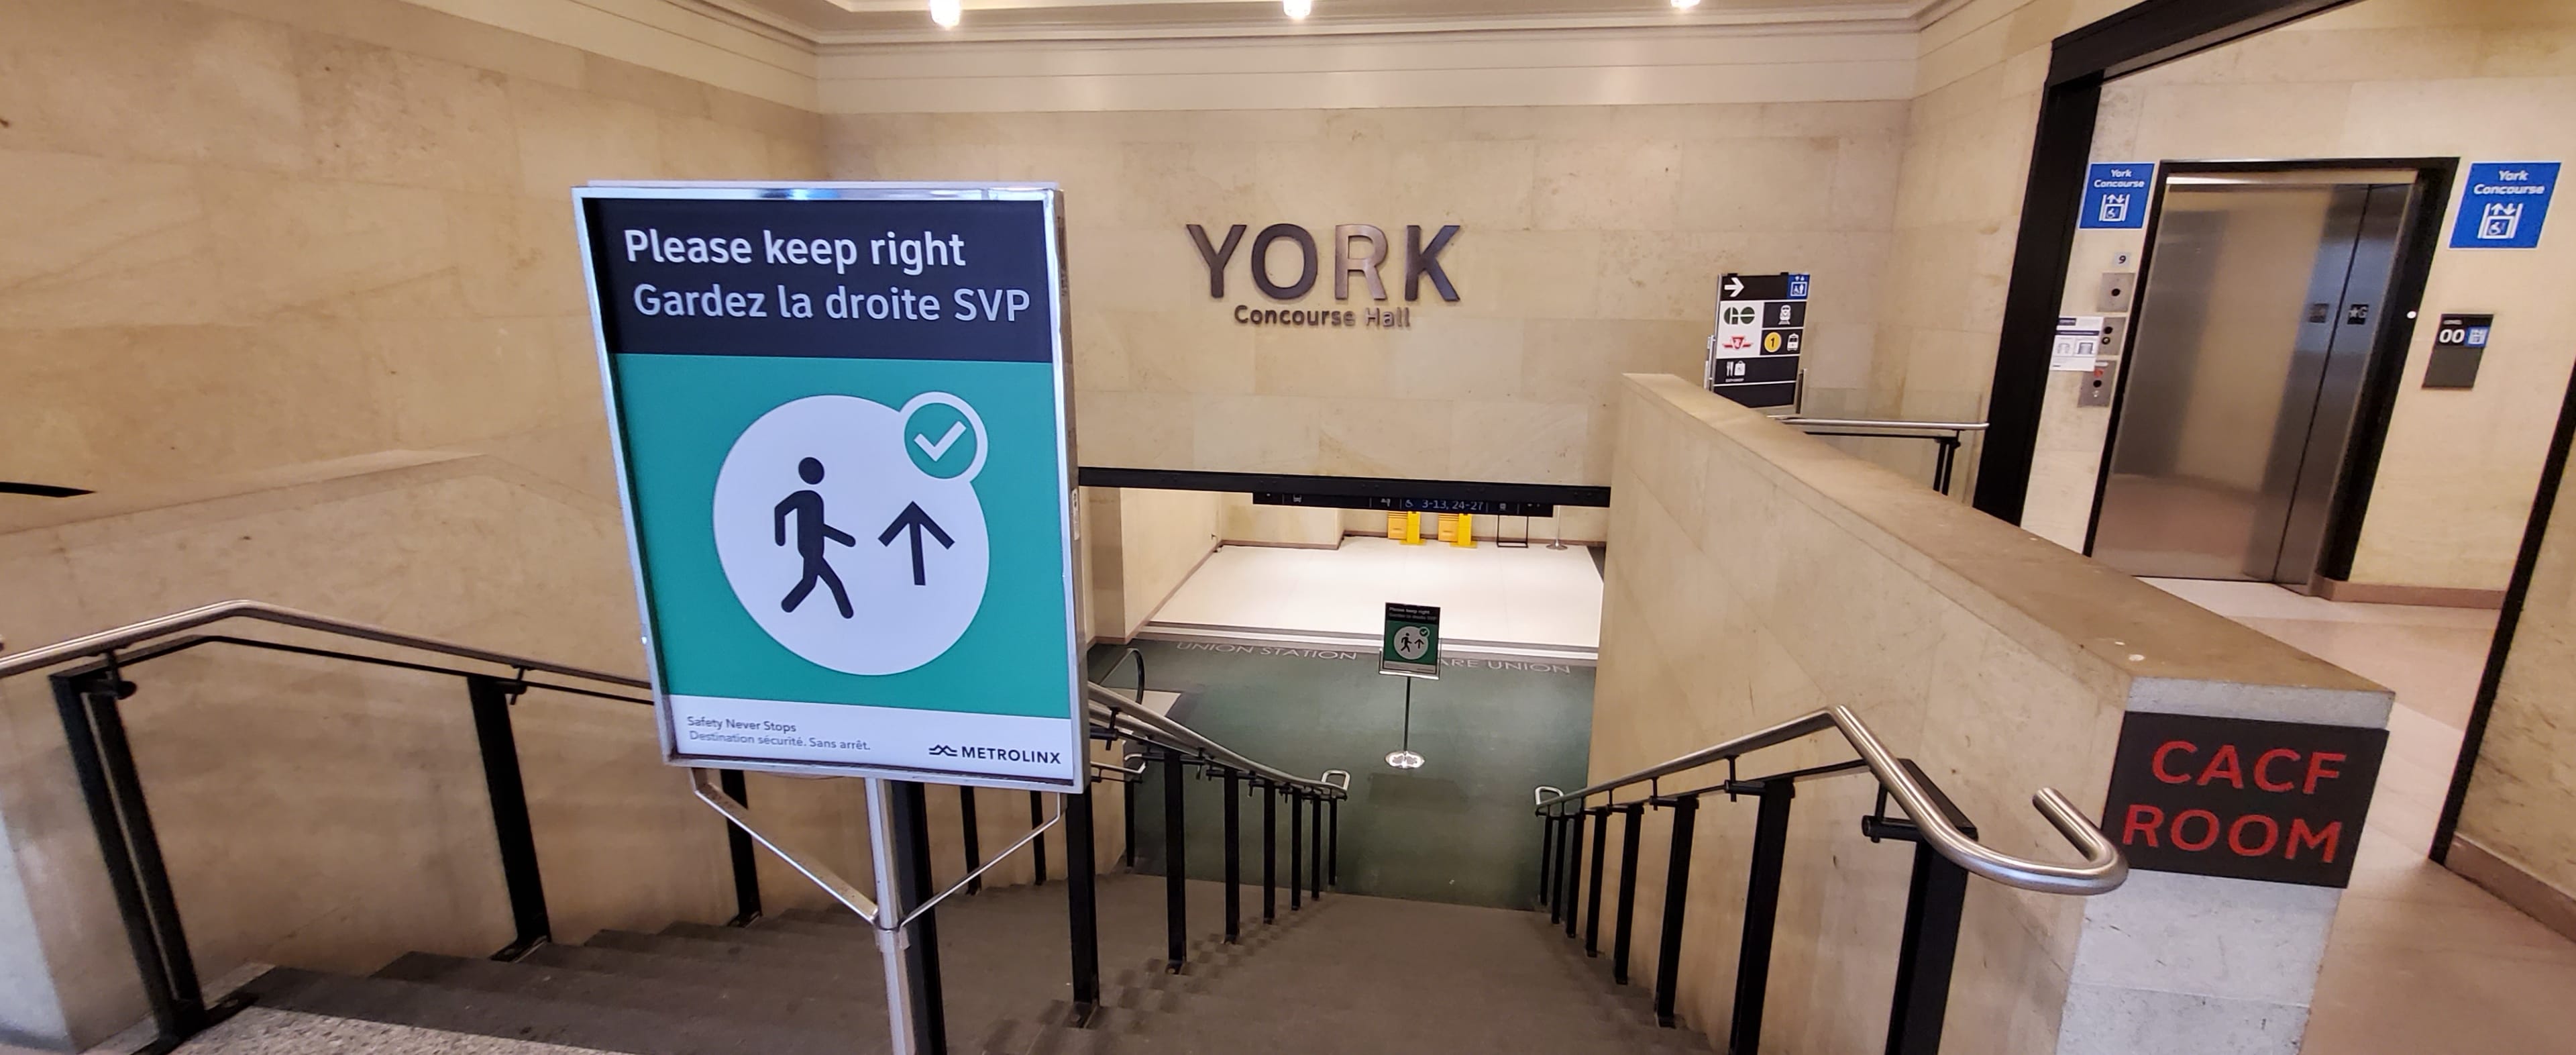 a sign that tells people on the stairs to stay to the right.